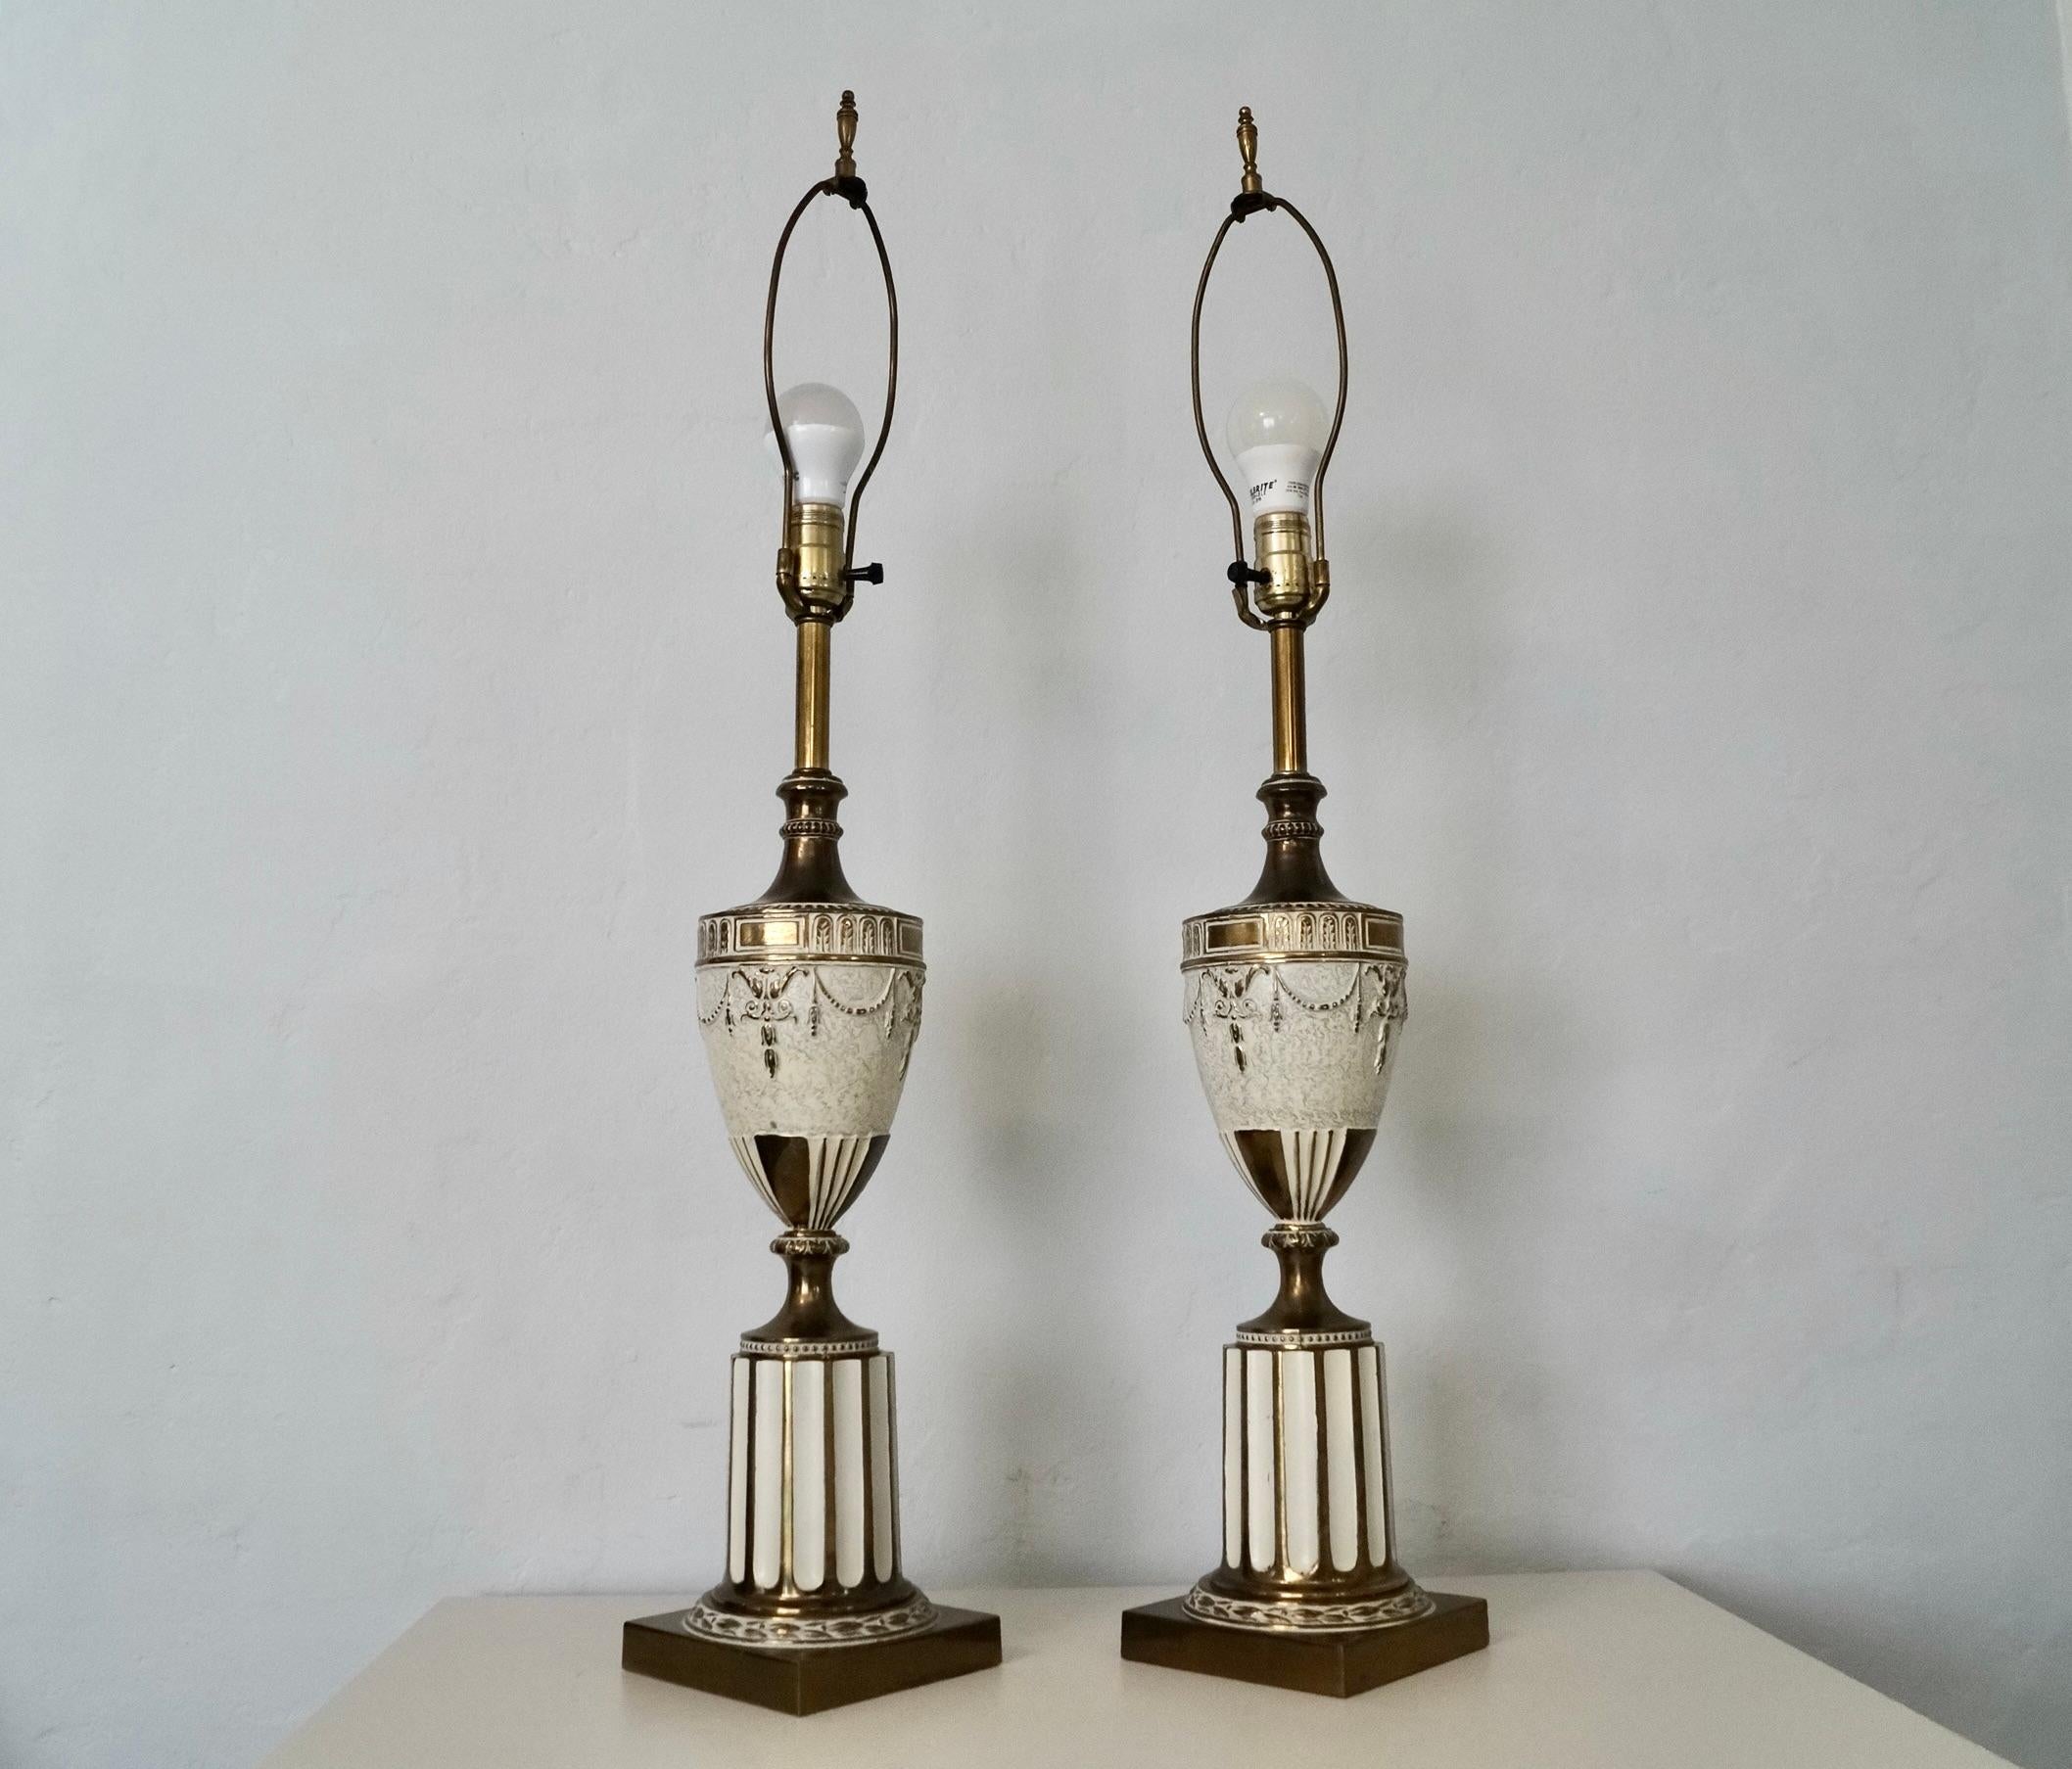 Pair of 1930's Neoclassical Ancient Roman Inspired Table Lamps  In Good Condition For Sale In Burbank, CA